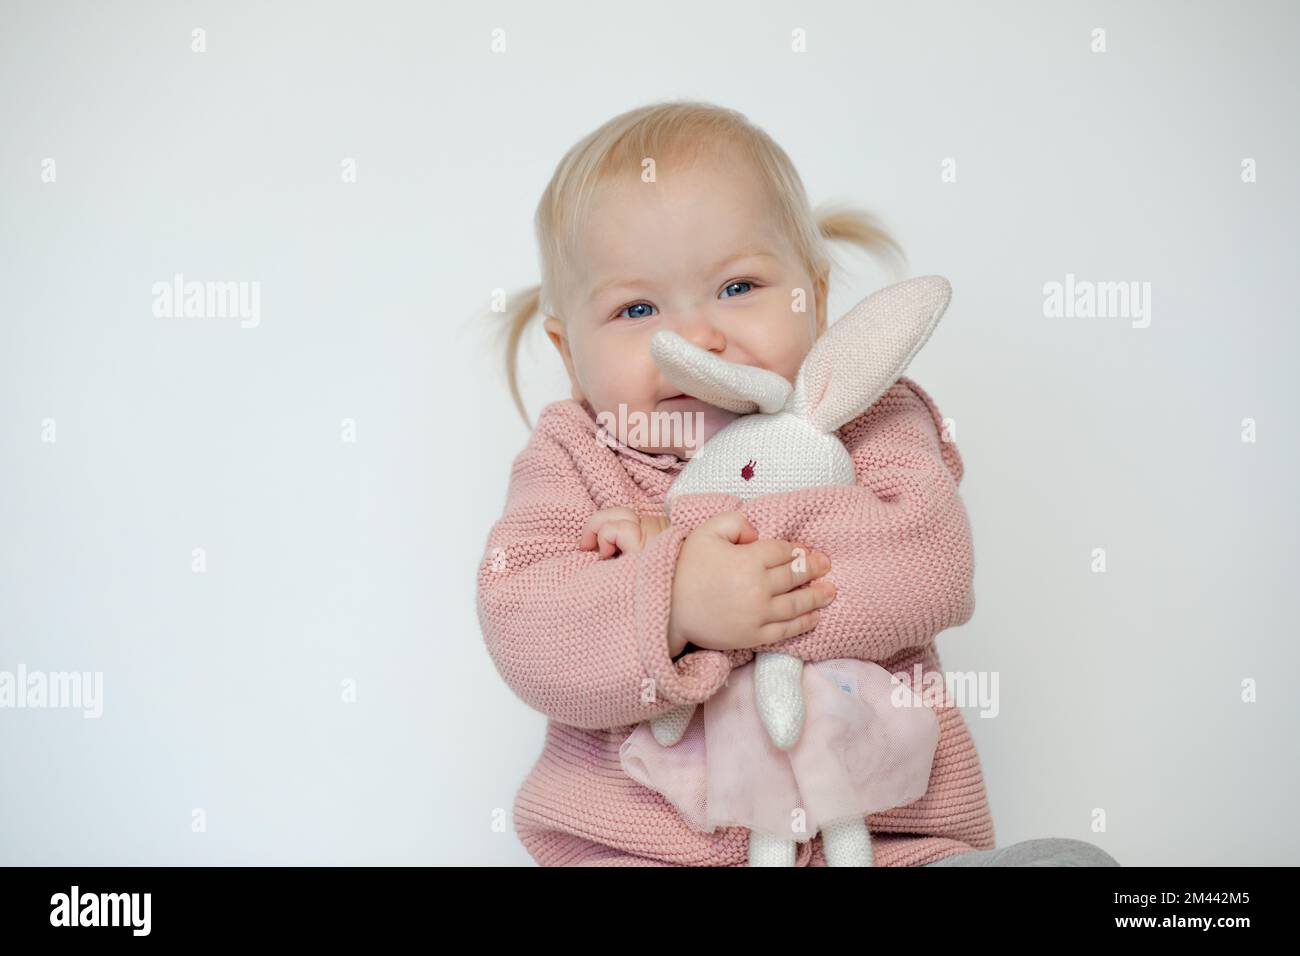 Beautiful baby girl play with stuffed animal, isolated on white. Joyous toddler happily embracing teddy bunny. Blonde haired child in pink clothes Stock Photo